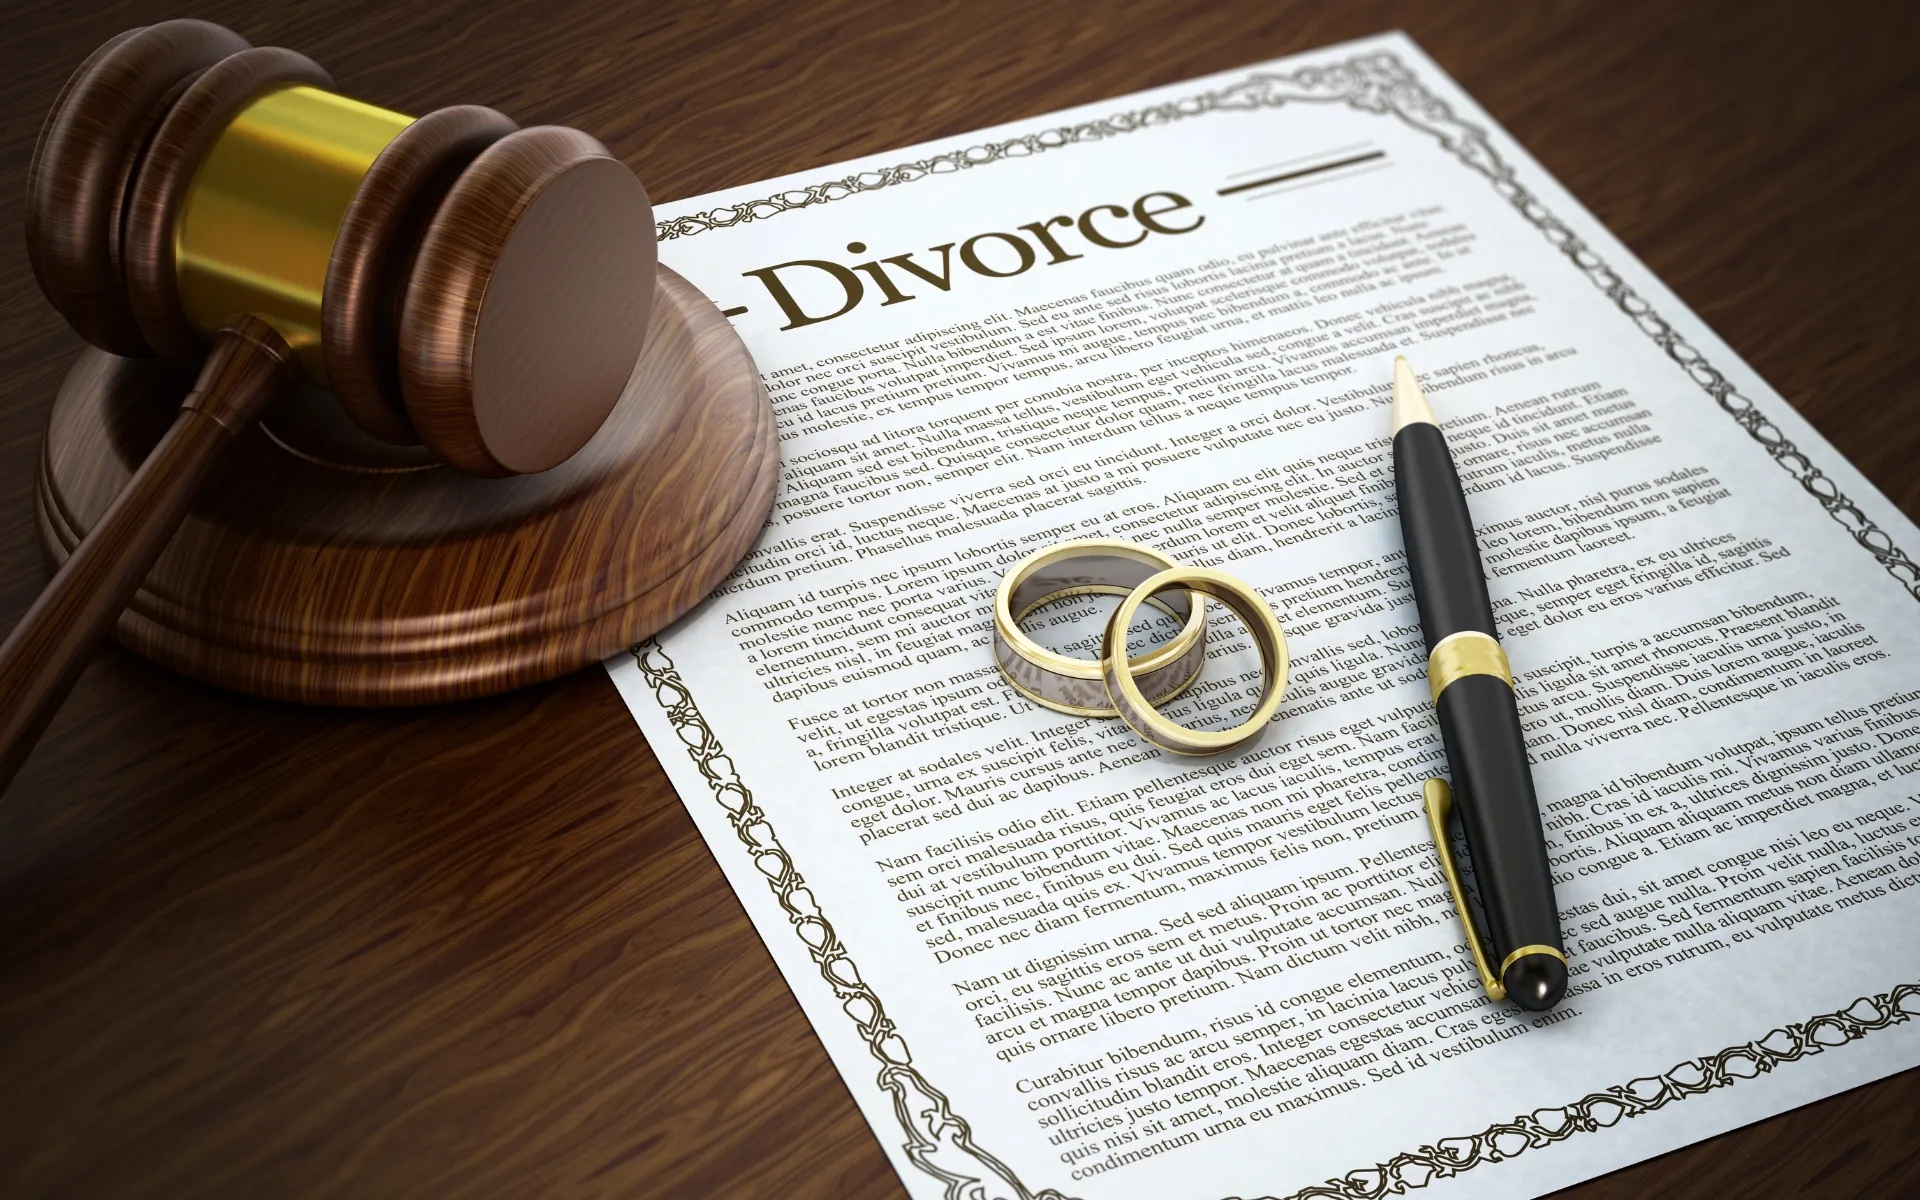 The Minnesota city with the highest divorce rate is Duluth.